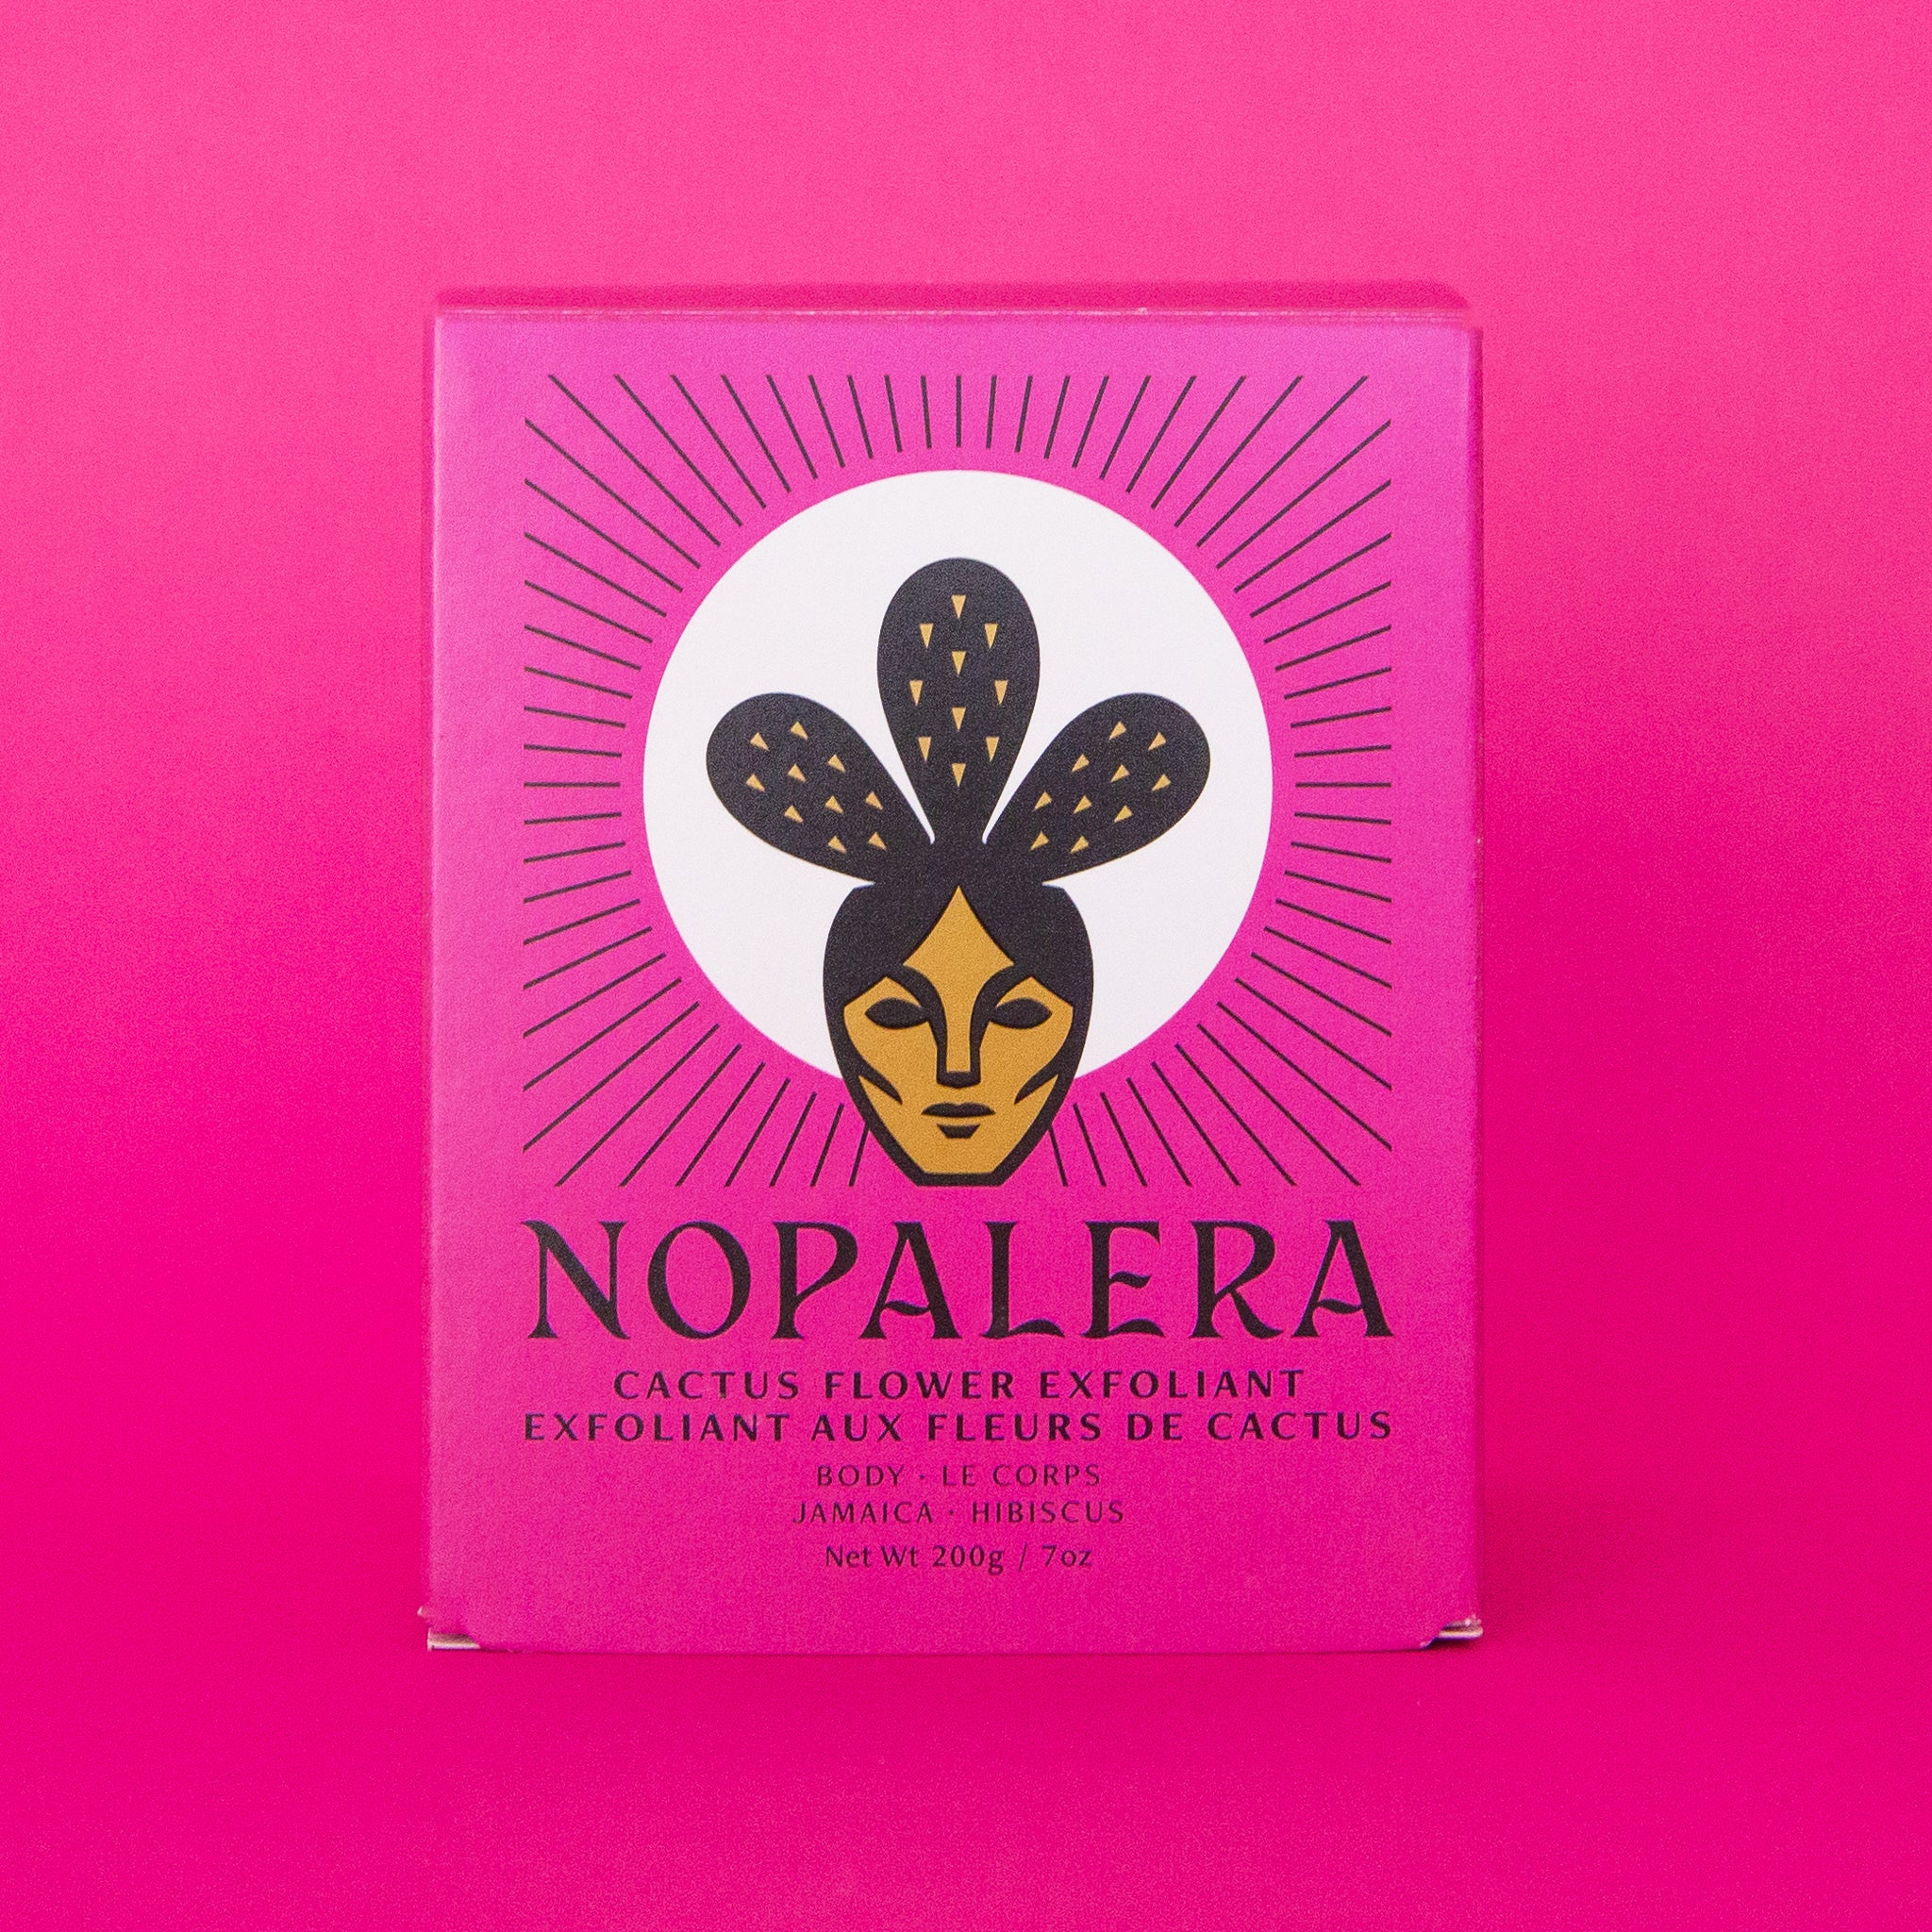 On a pink background is a hot pink packaging filled with a jar of cactus flower exfoliant. 